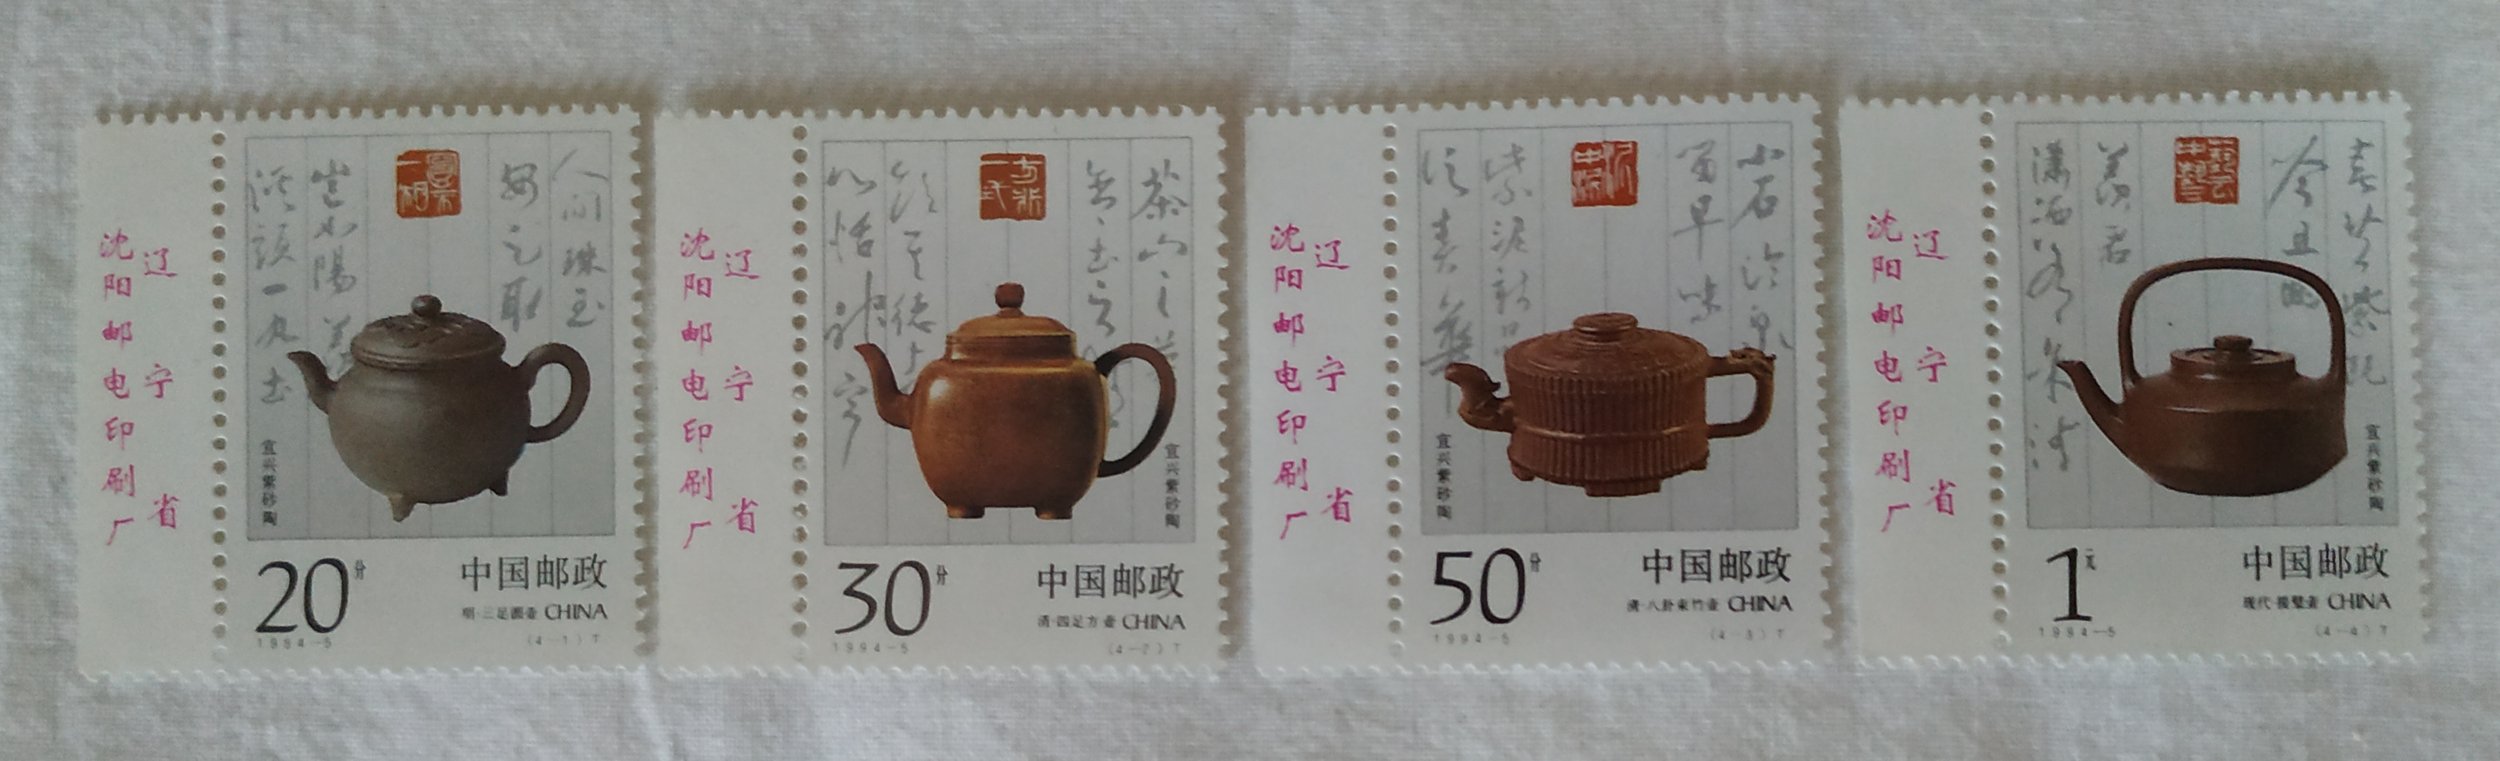 The Journey of Tea from China to the World on International Tea Day